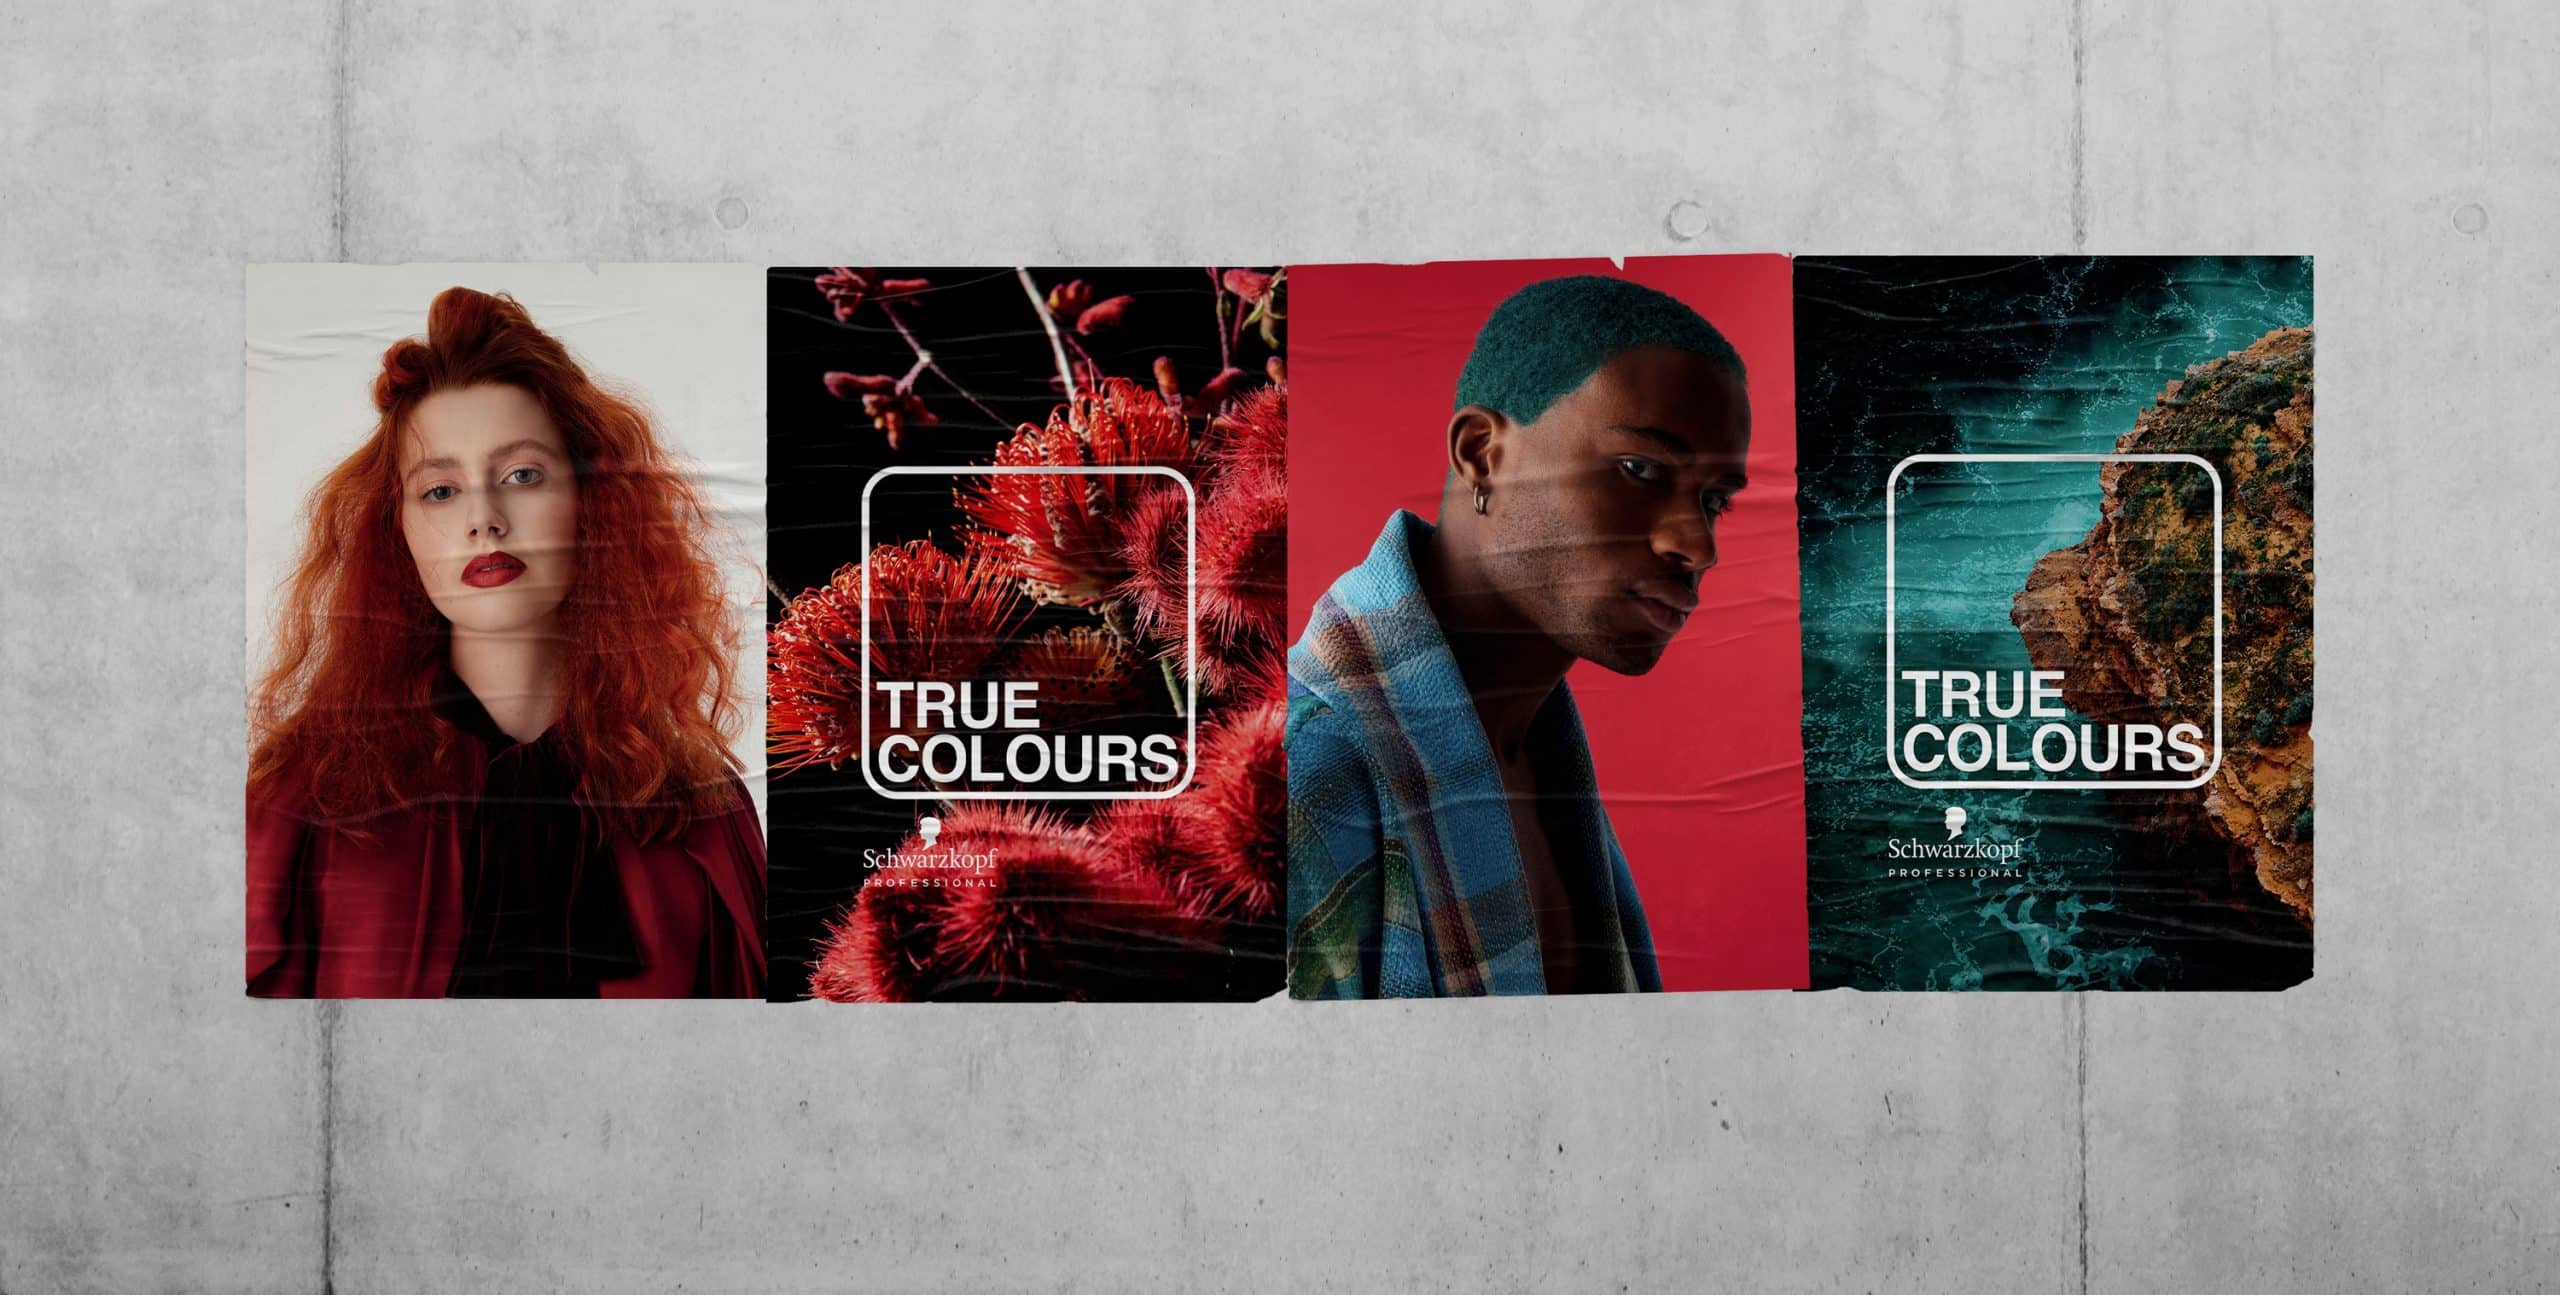 A row of four wheatpaste posters on a concrete wall. The posters feature a female model with red hair, a male model with blue hair, a red floral arrangement and a drone photograph of the ocean near a cliff-face. The posters are branded 'True Colours' - Schwarzkopf Professional